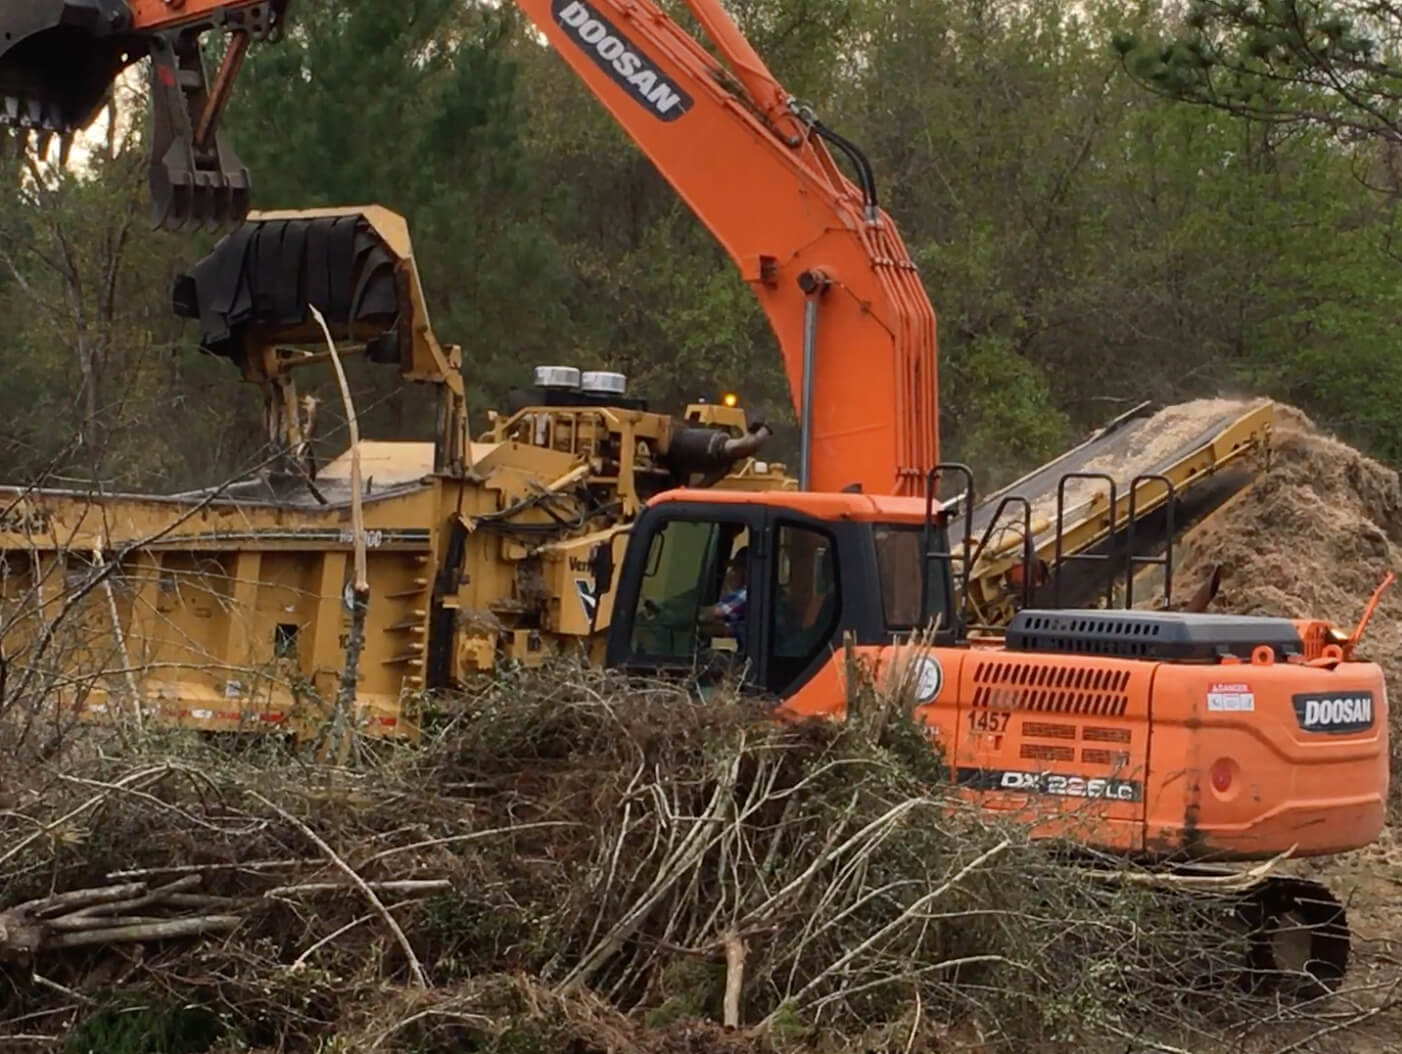 One of GEC's excavators dropping tree limbs into a stump grinder